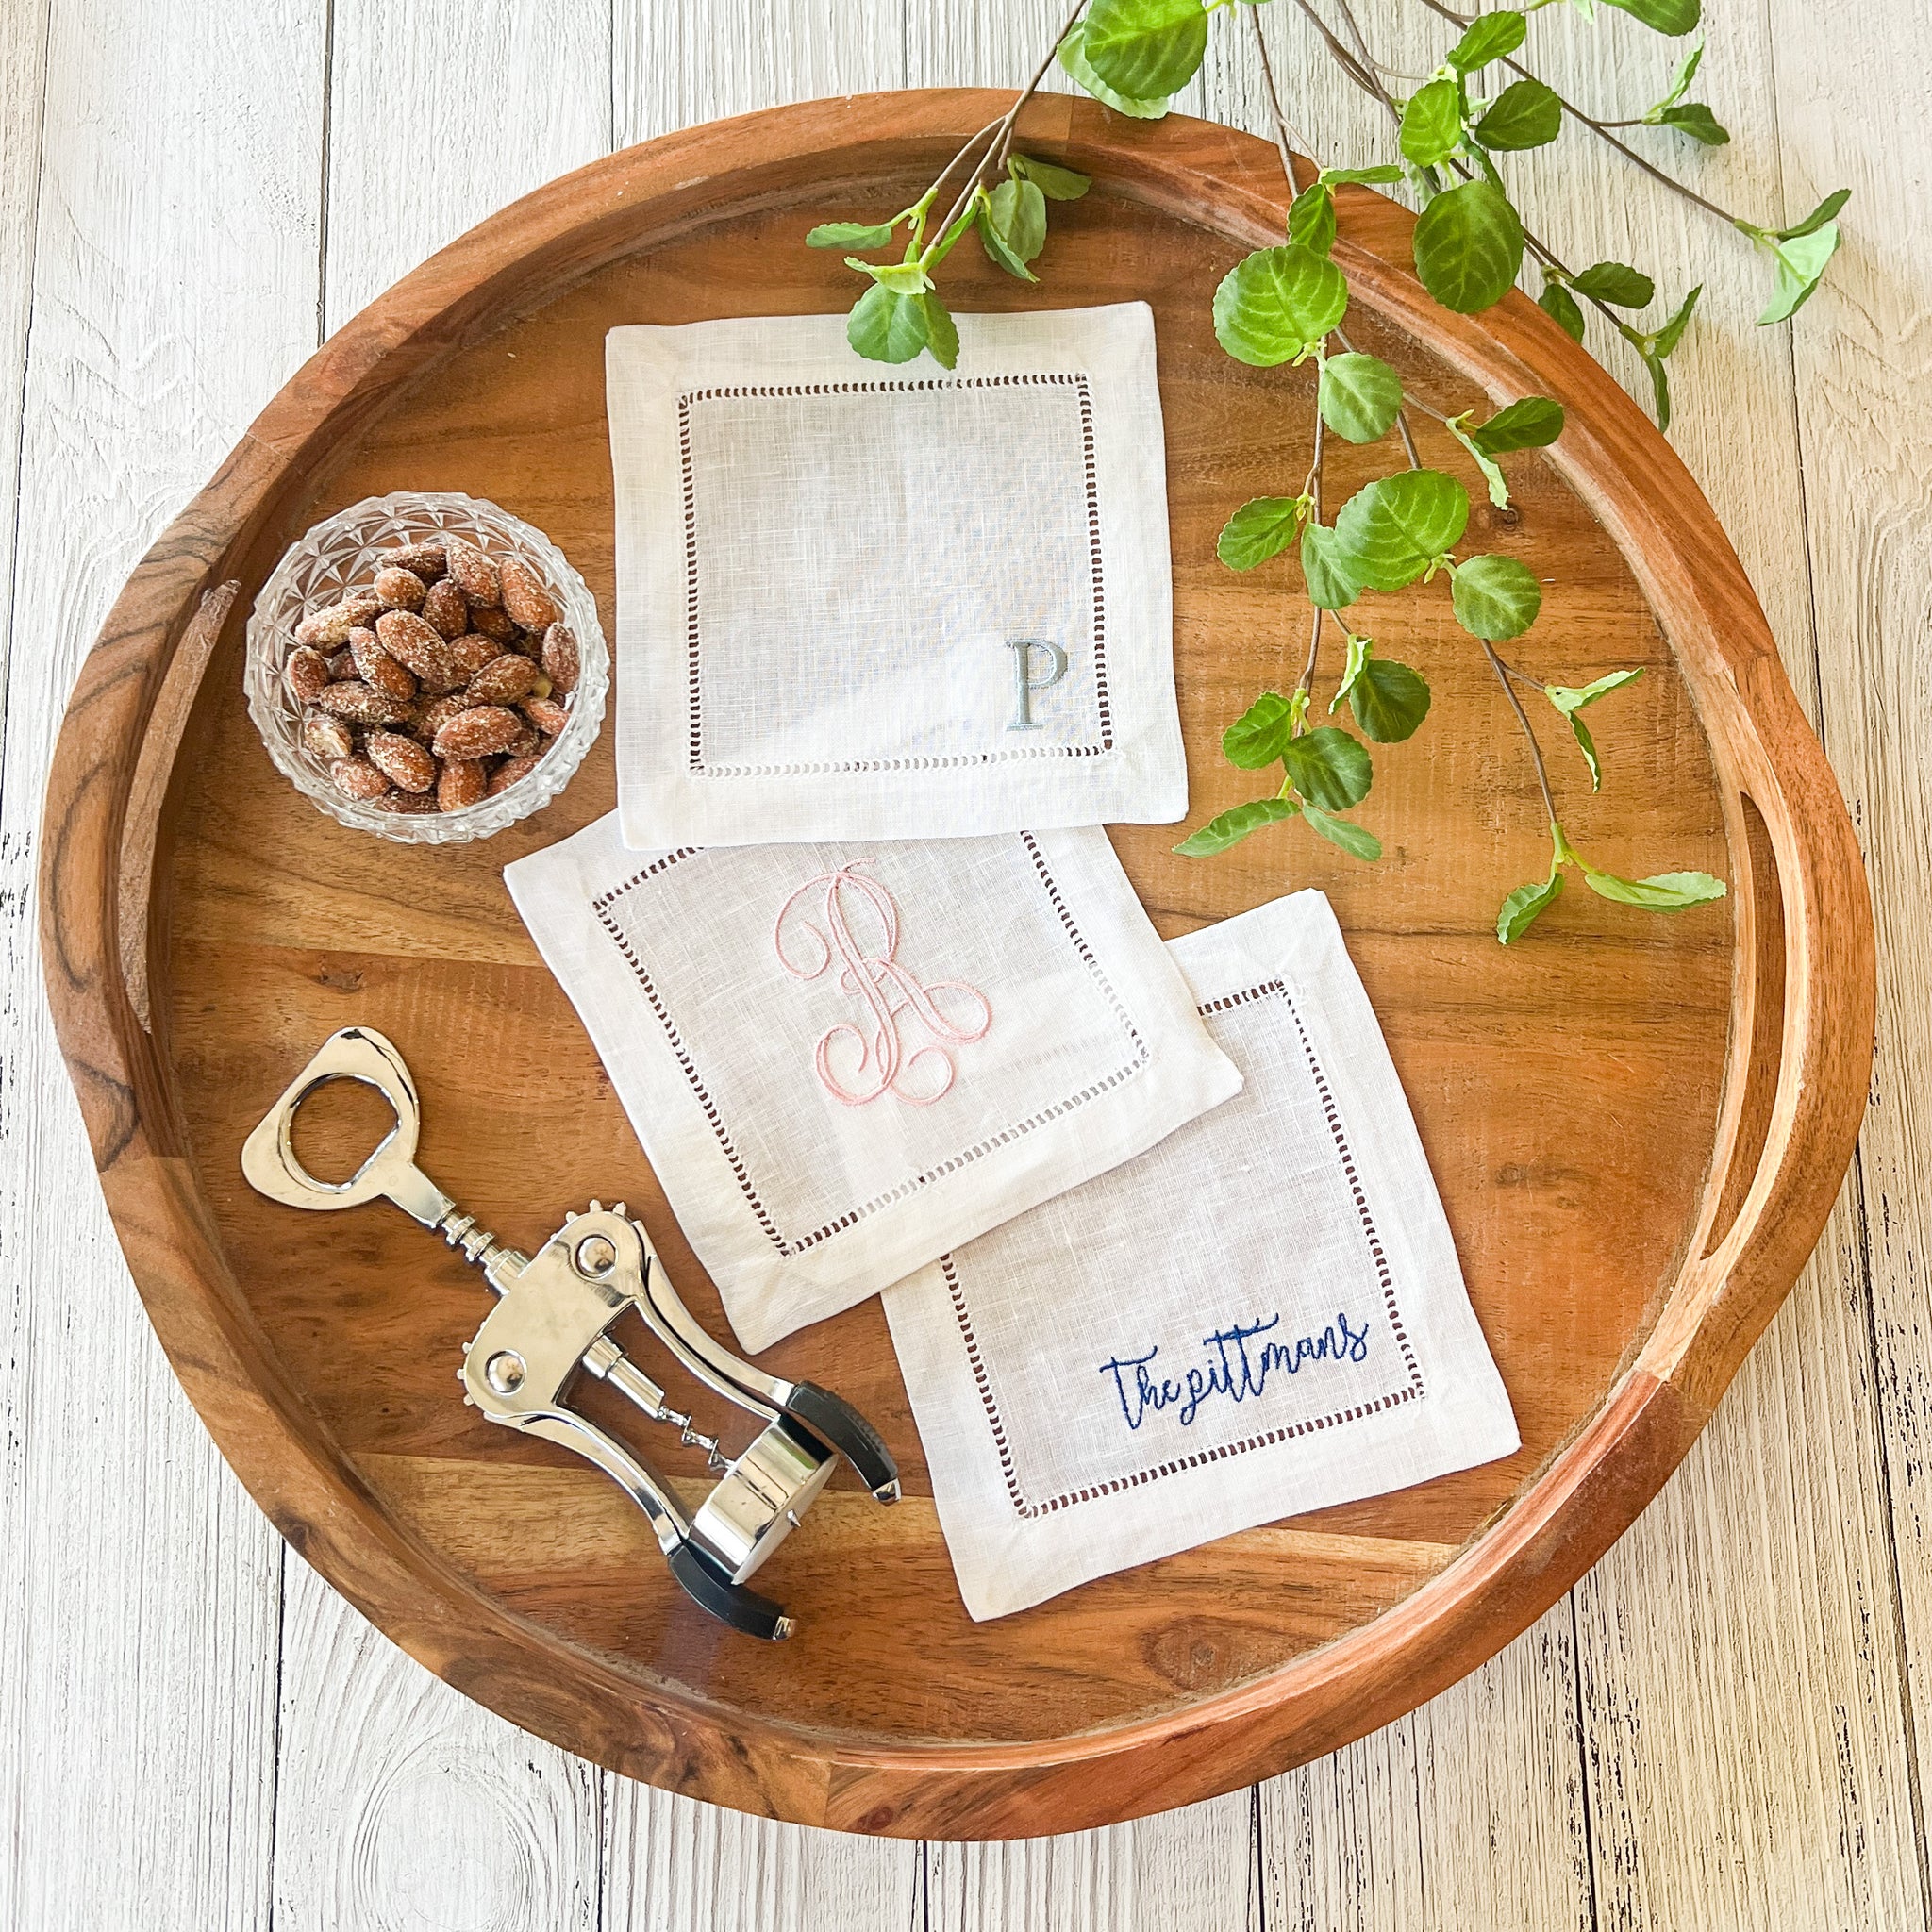 Personalized Housewarming Gifts | IGP Personalized Gifts